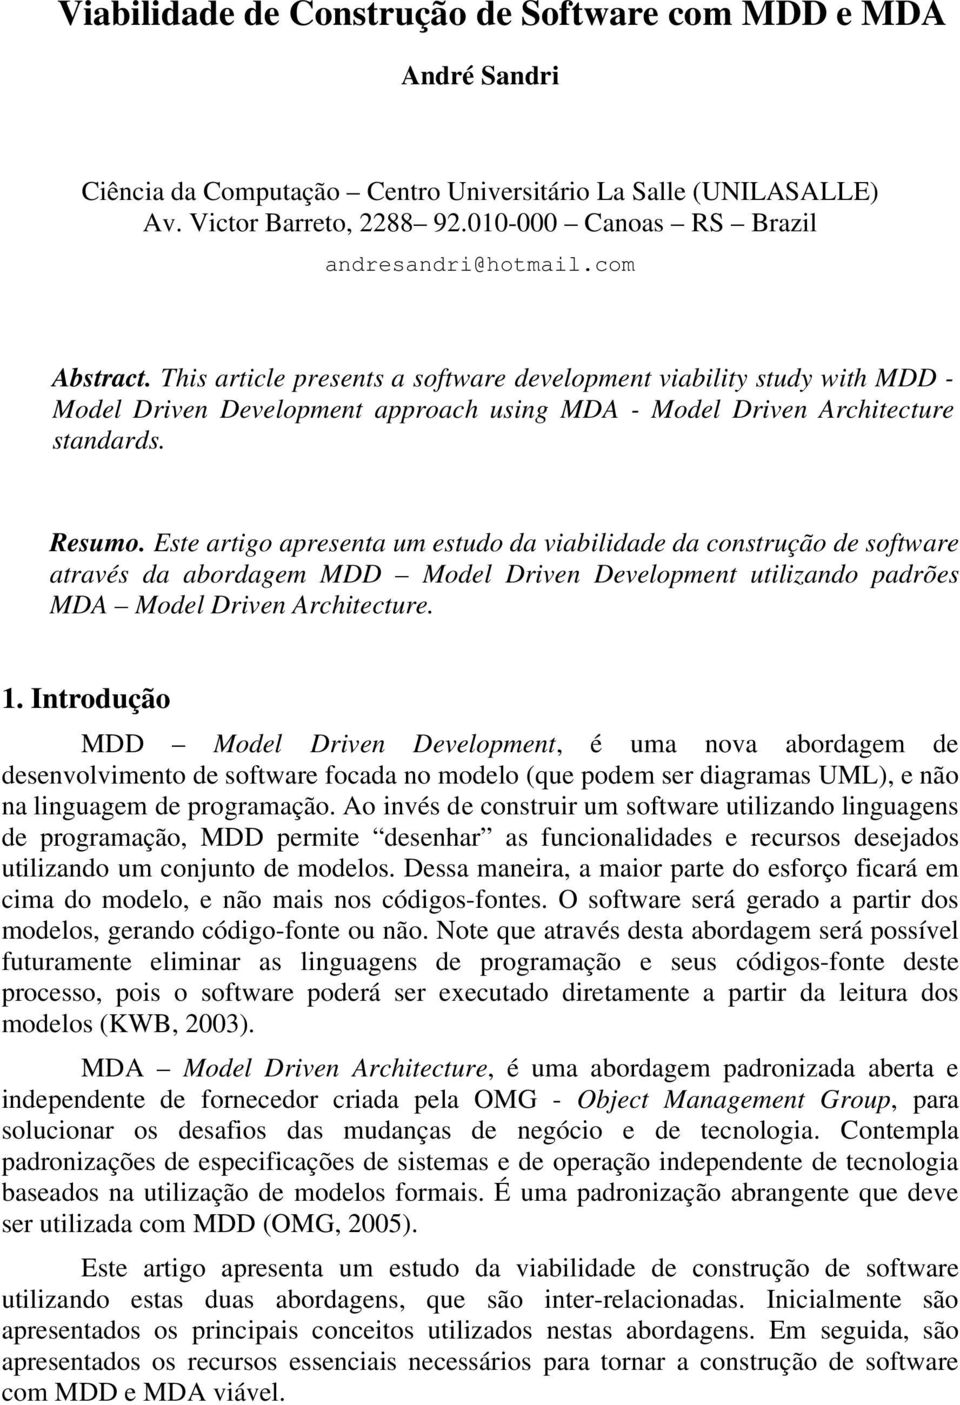 This article presents a software development viability study with MDD - Model Driven Development approach using MDA - Model Driven Architecture standards. Resumo.